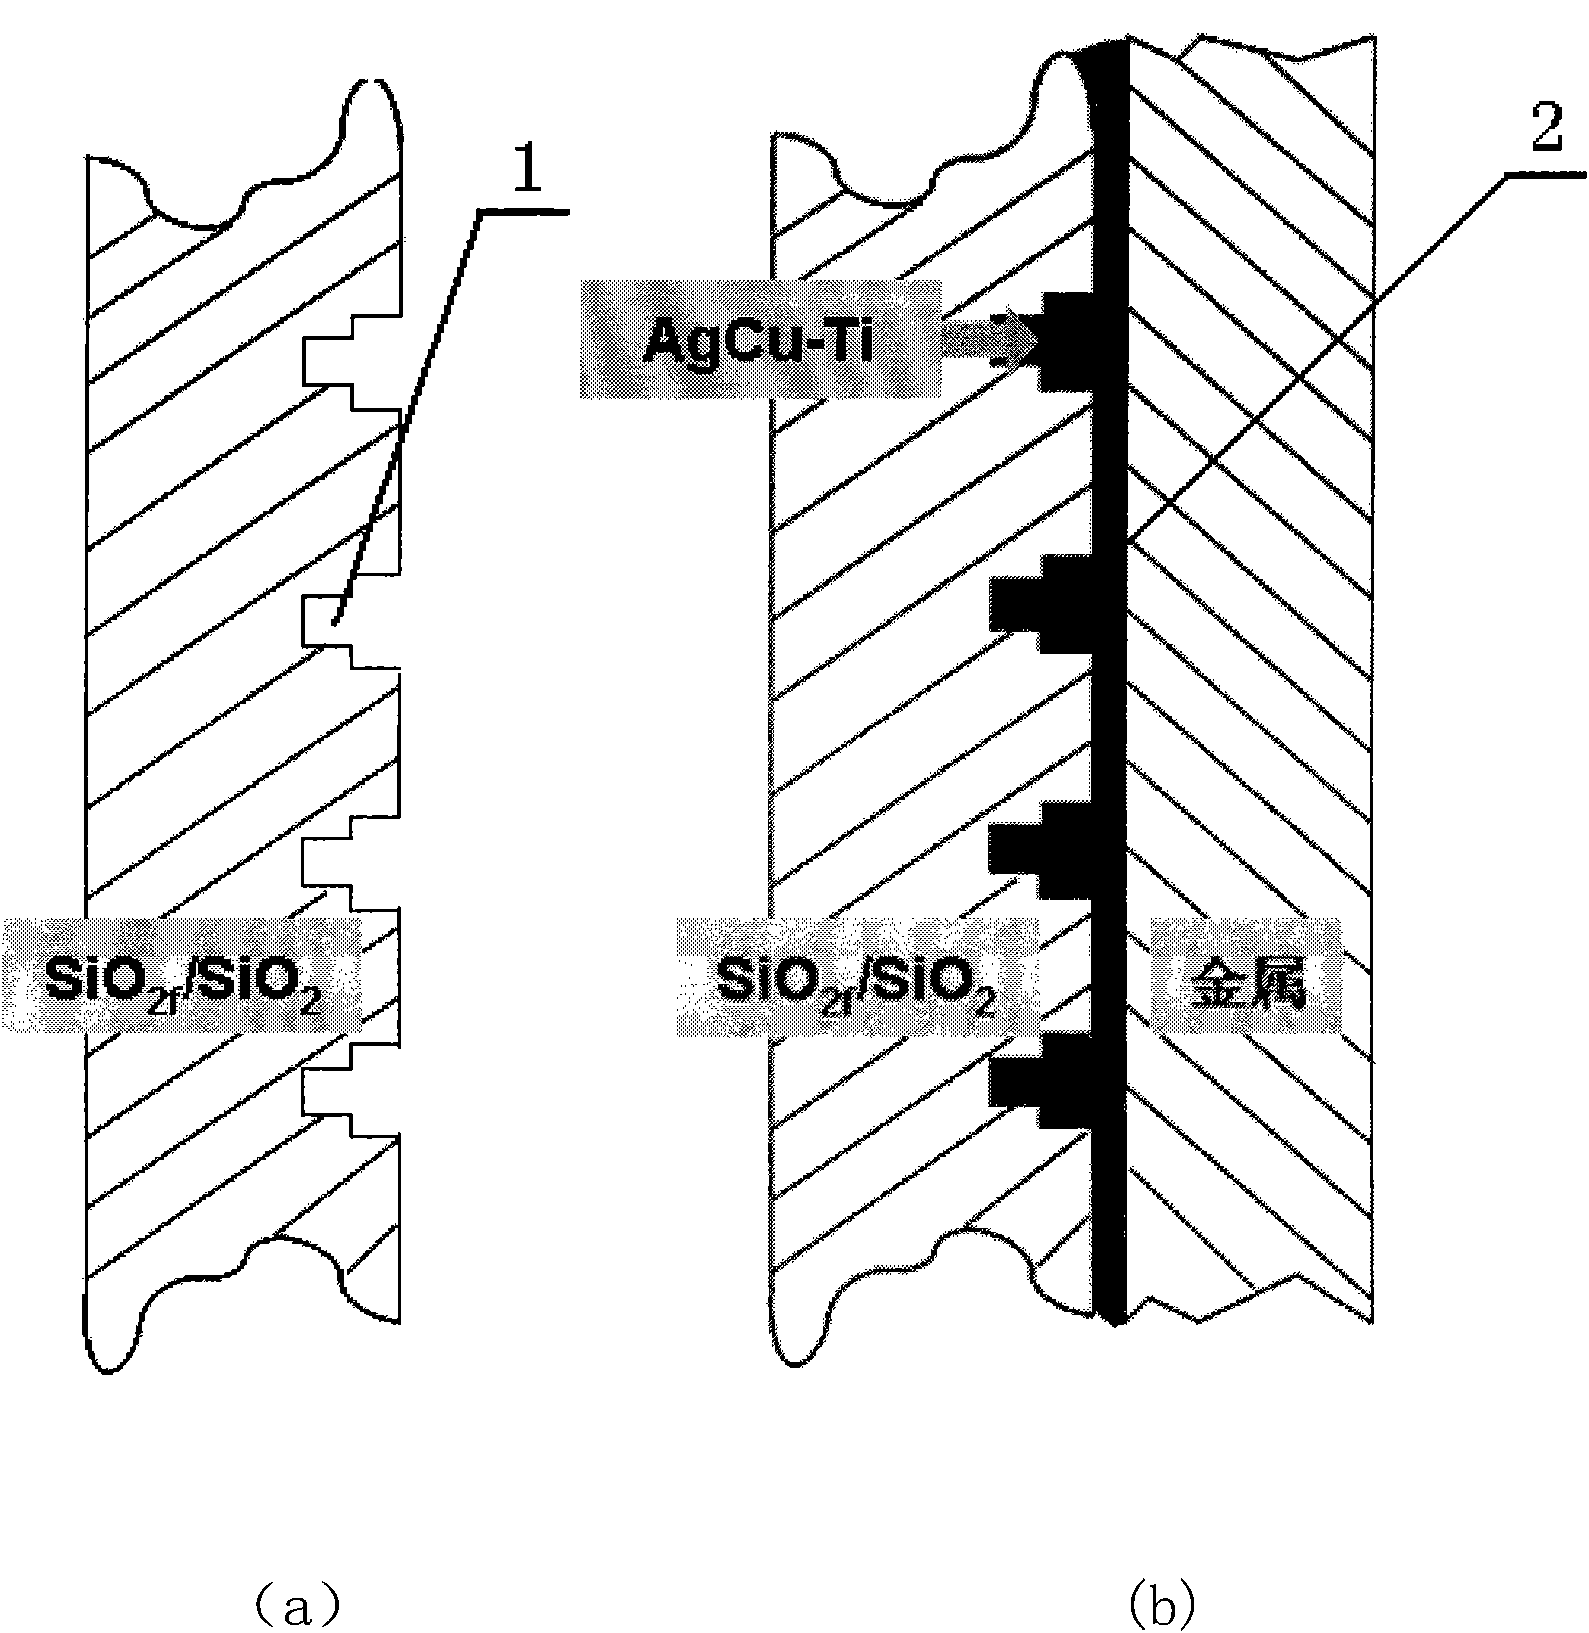 Process for soldering SiO2f/SiO2 composite ceramic and metal material